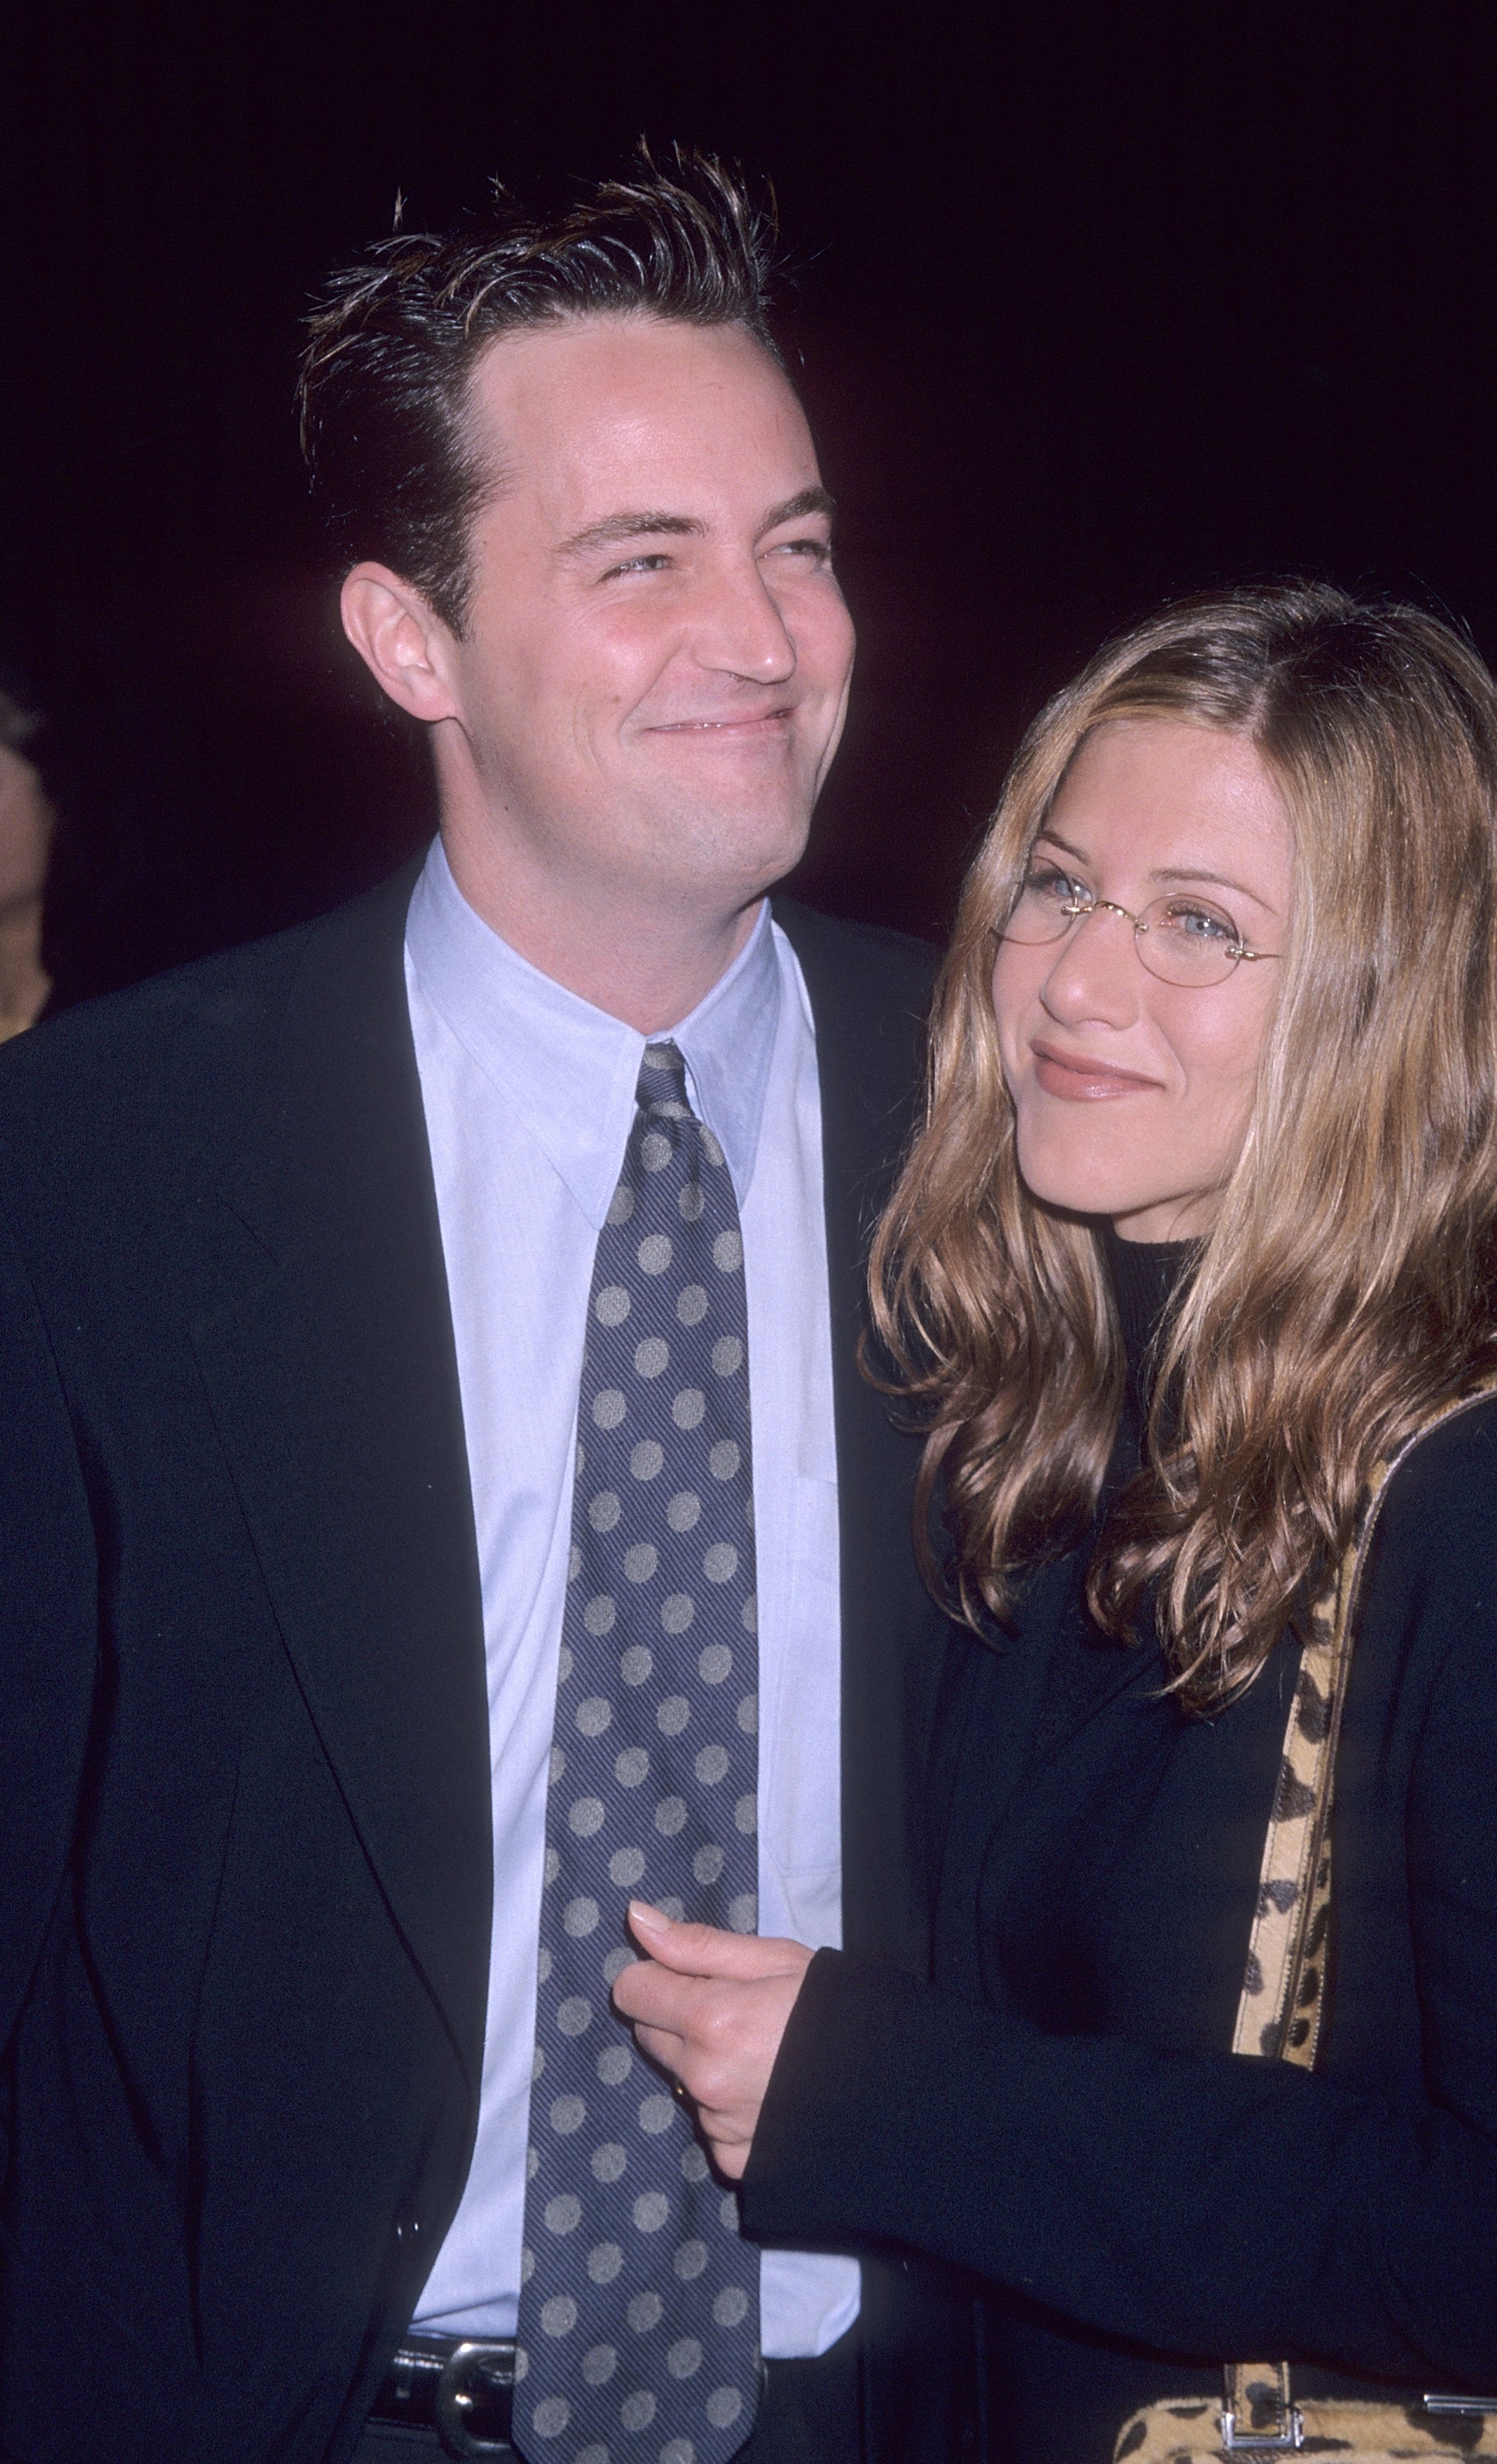 Close-up of a smiling Matthew  in a suit and tie with Jennifer